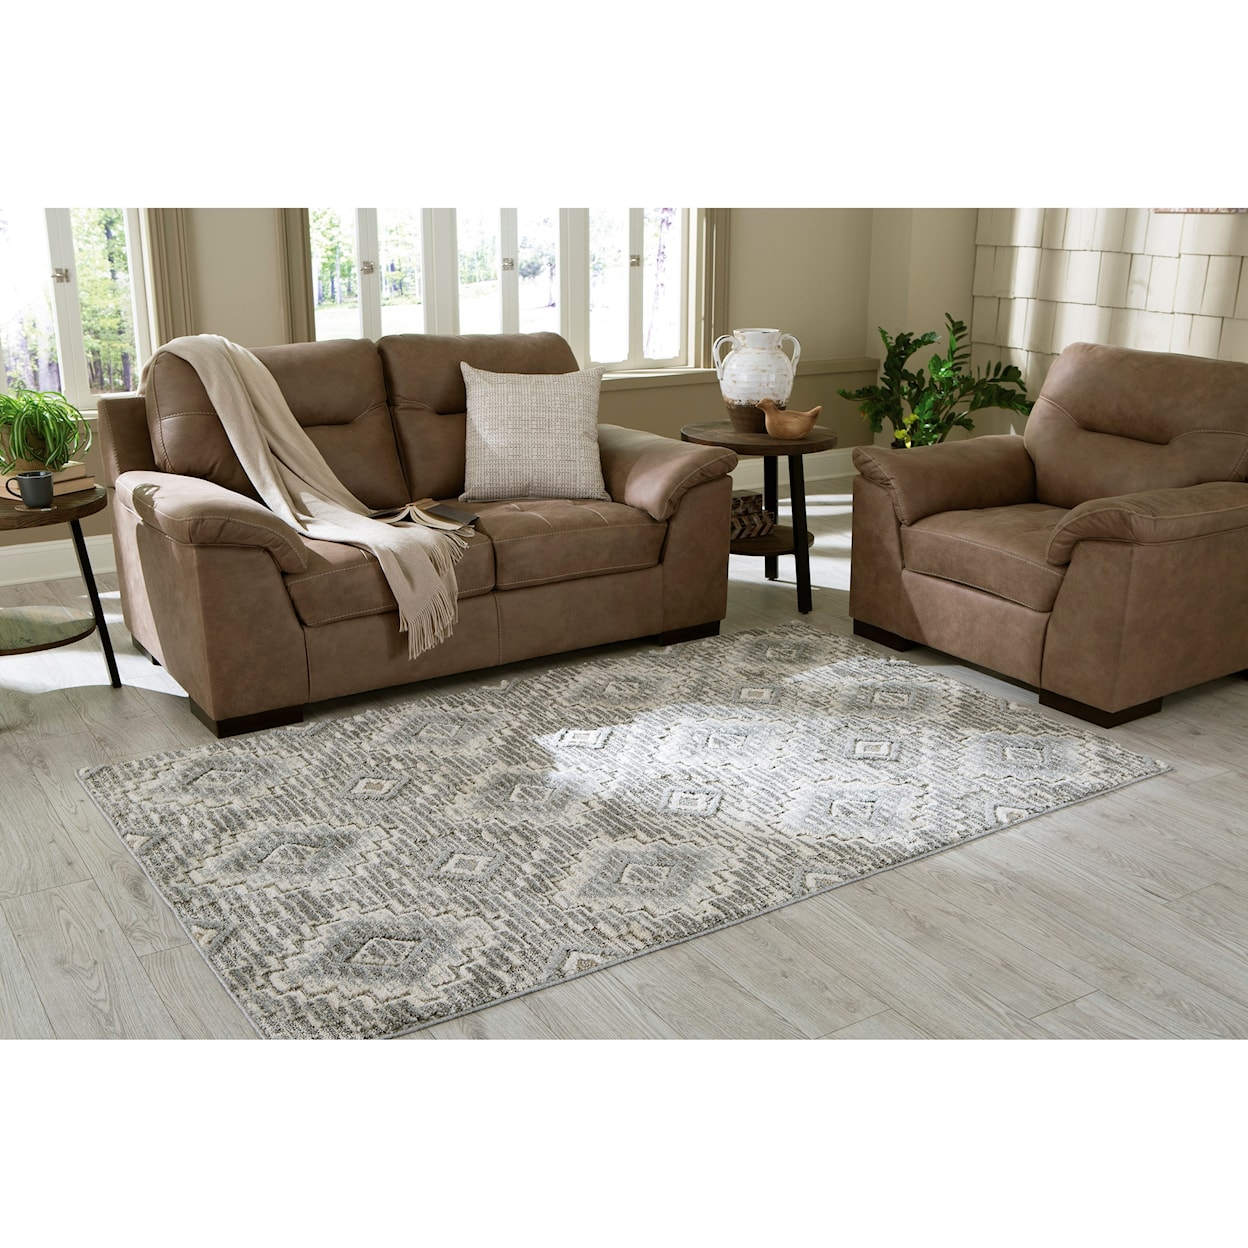 Signature Design by Ashley Casual Area Rugs Monwick Gray/Cream Large Rug